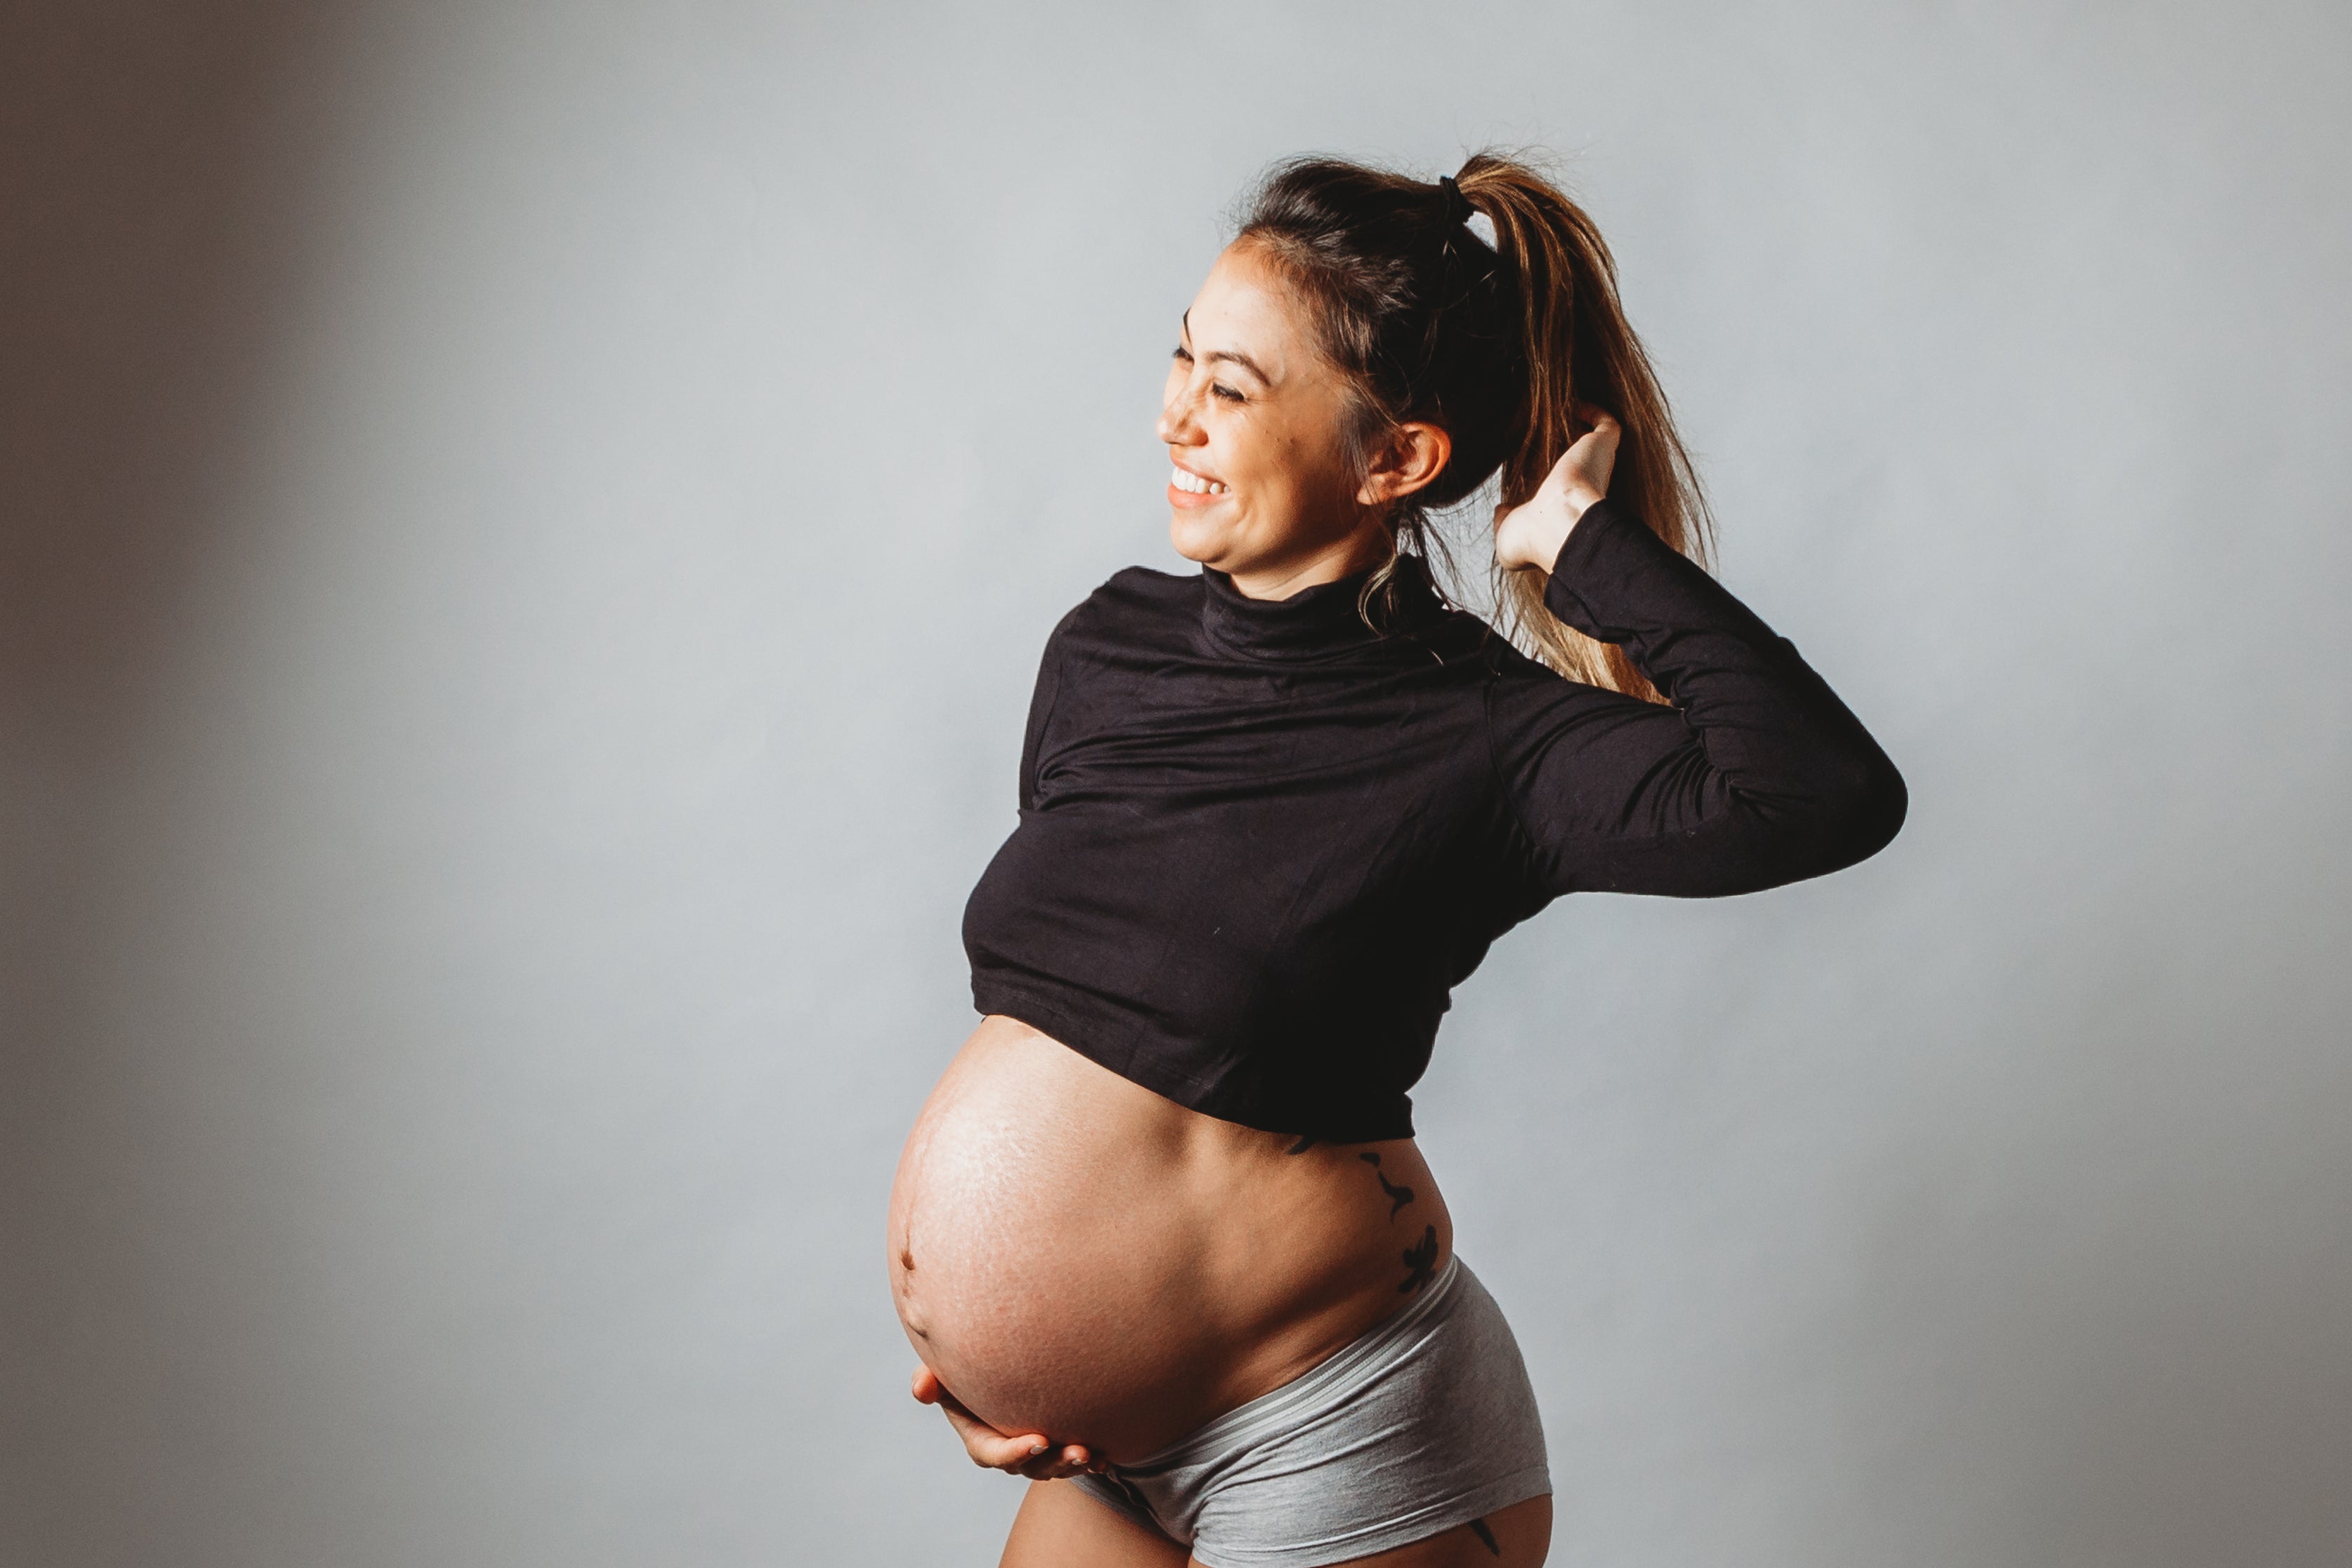 Learn more about motherhood and importance of pre and post natal health